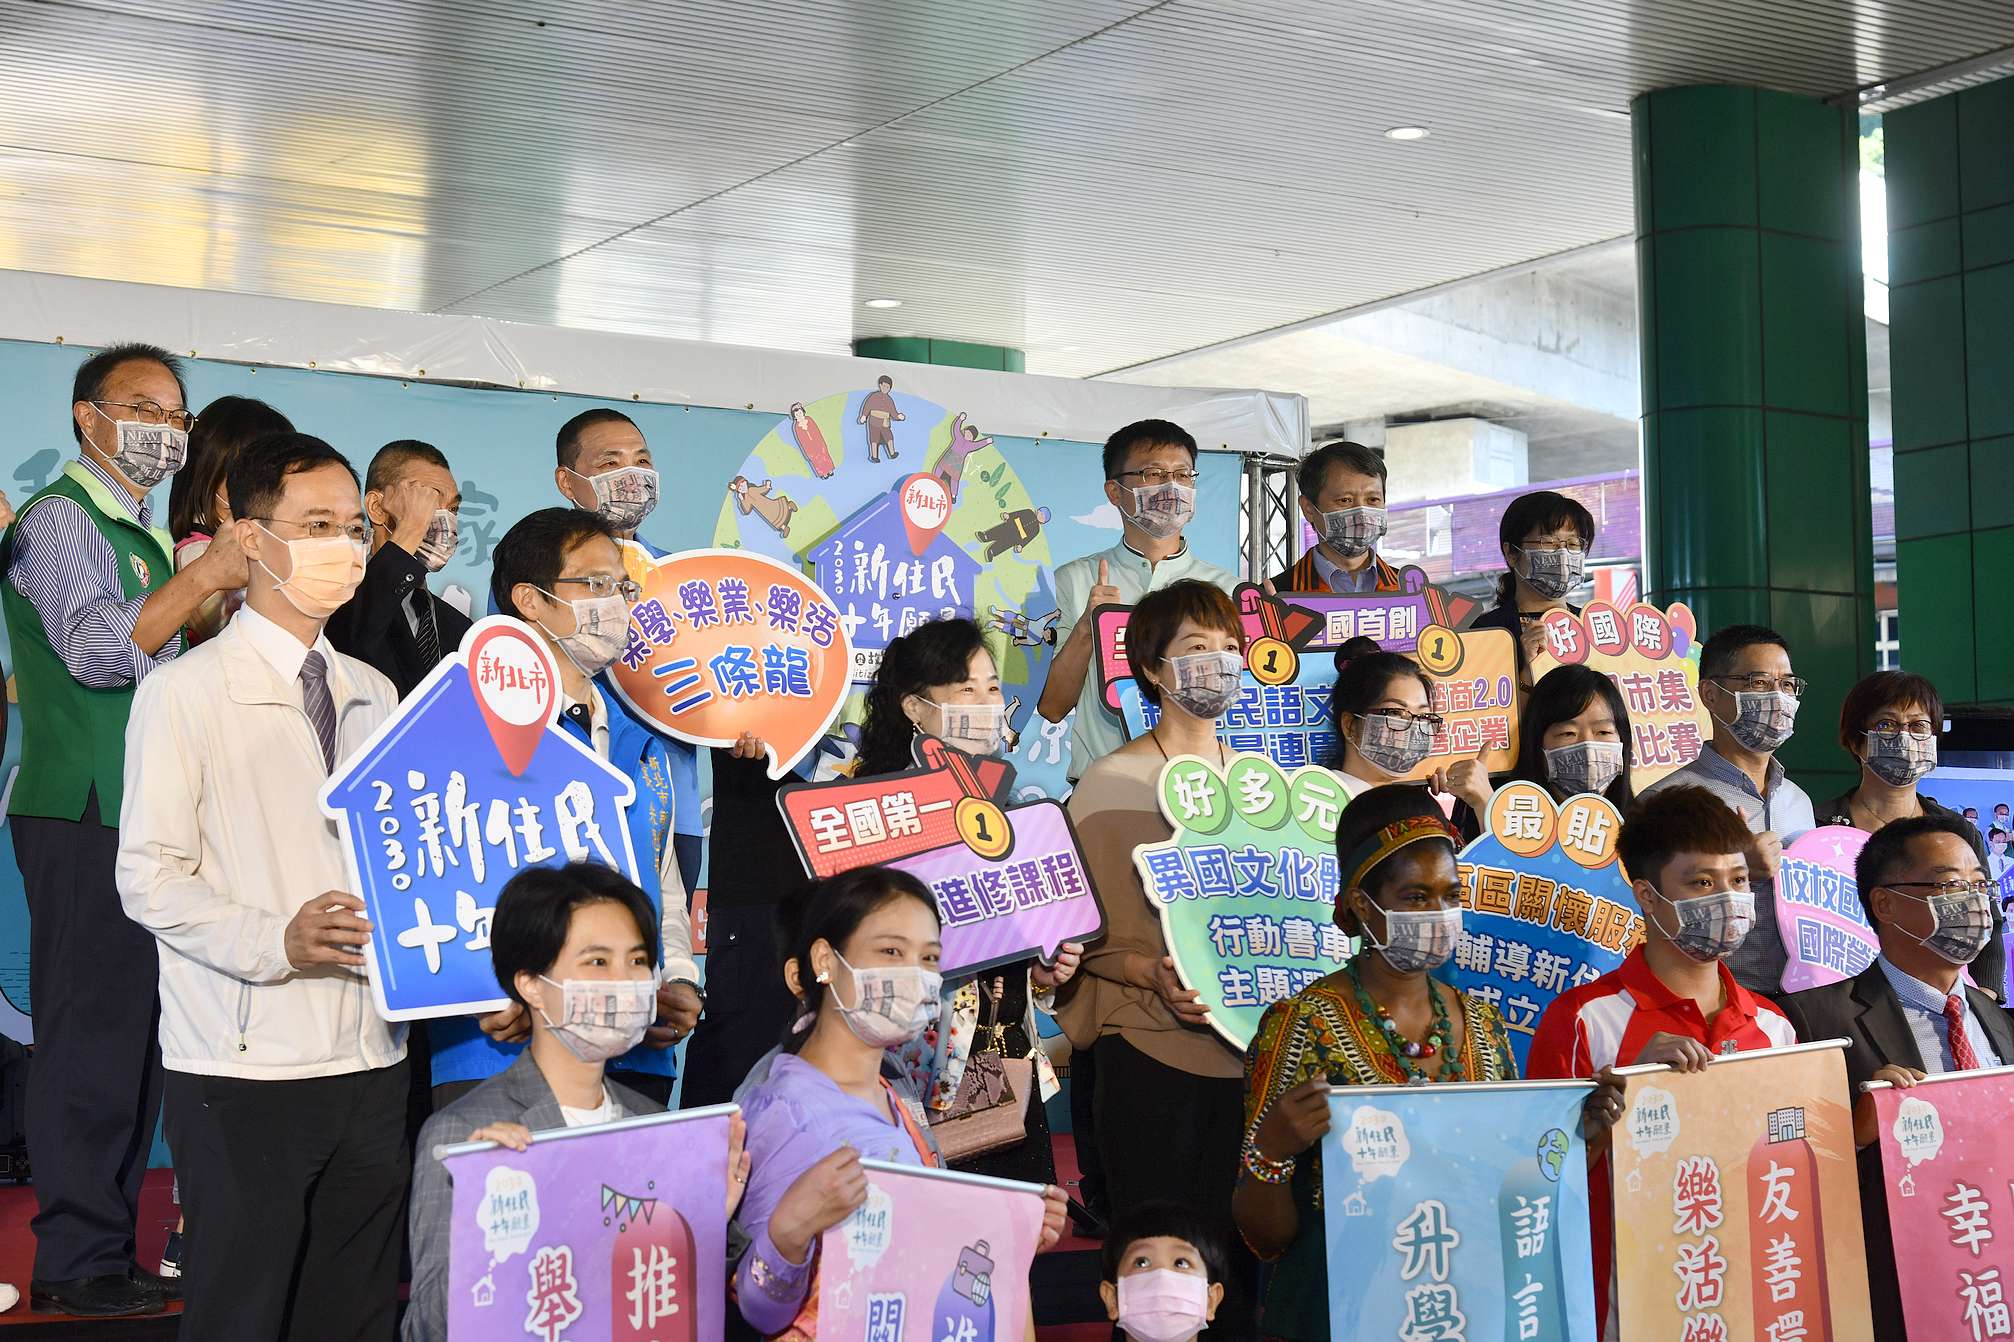 A policy that aims to “Live happily, Work happily and Learn happily” was introduced. (Photo / Provided by the New Taipei City Government)